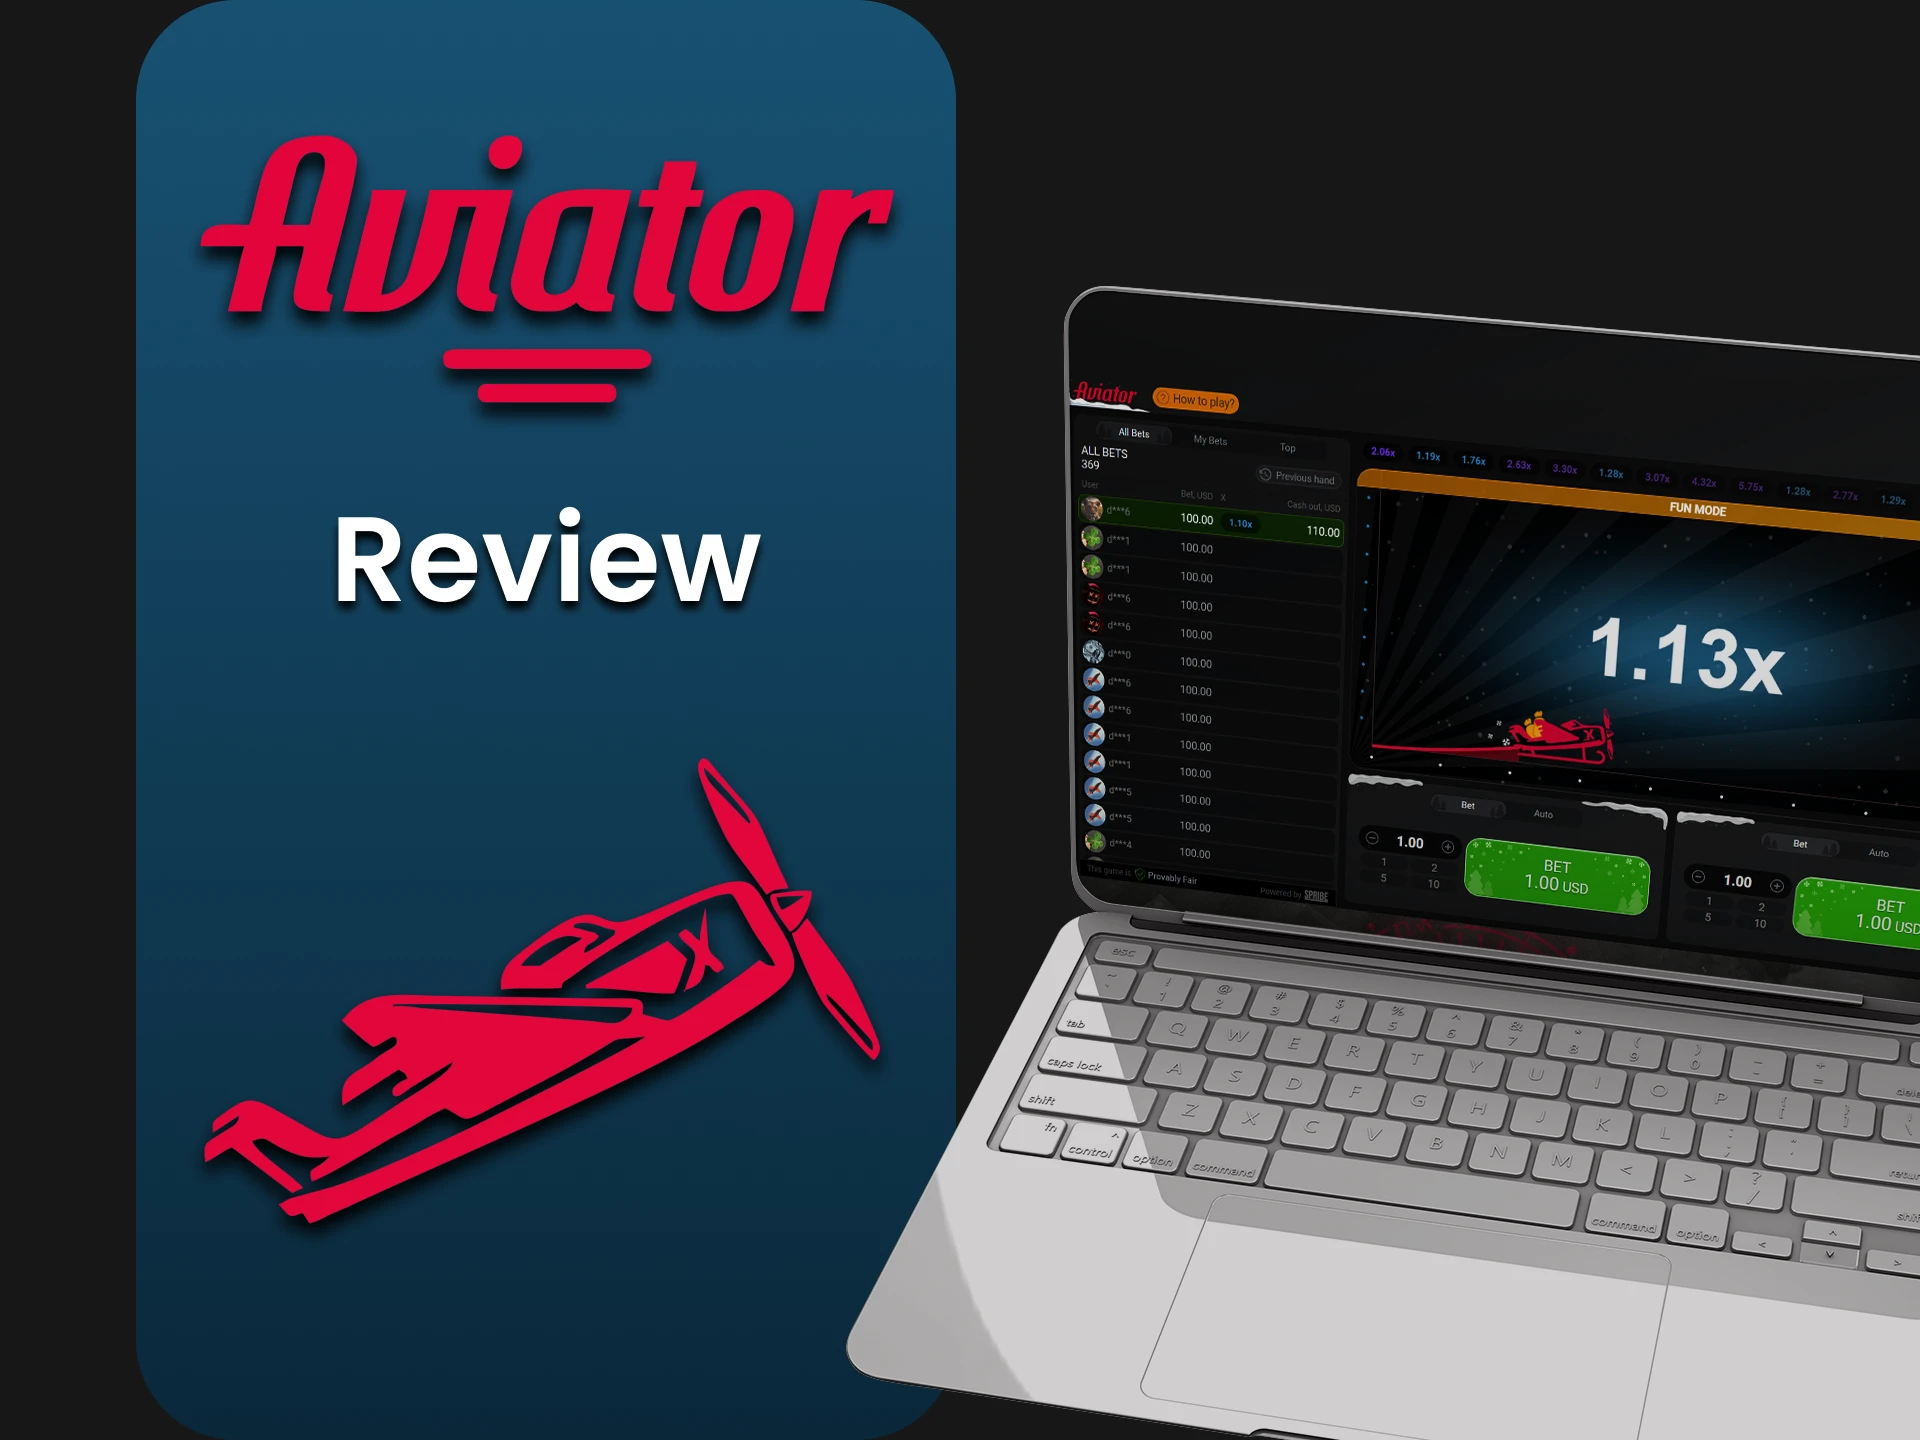 We will talk about the demo version of the game Aviator.